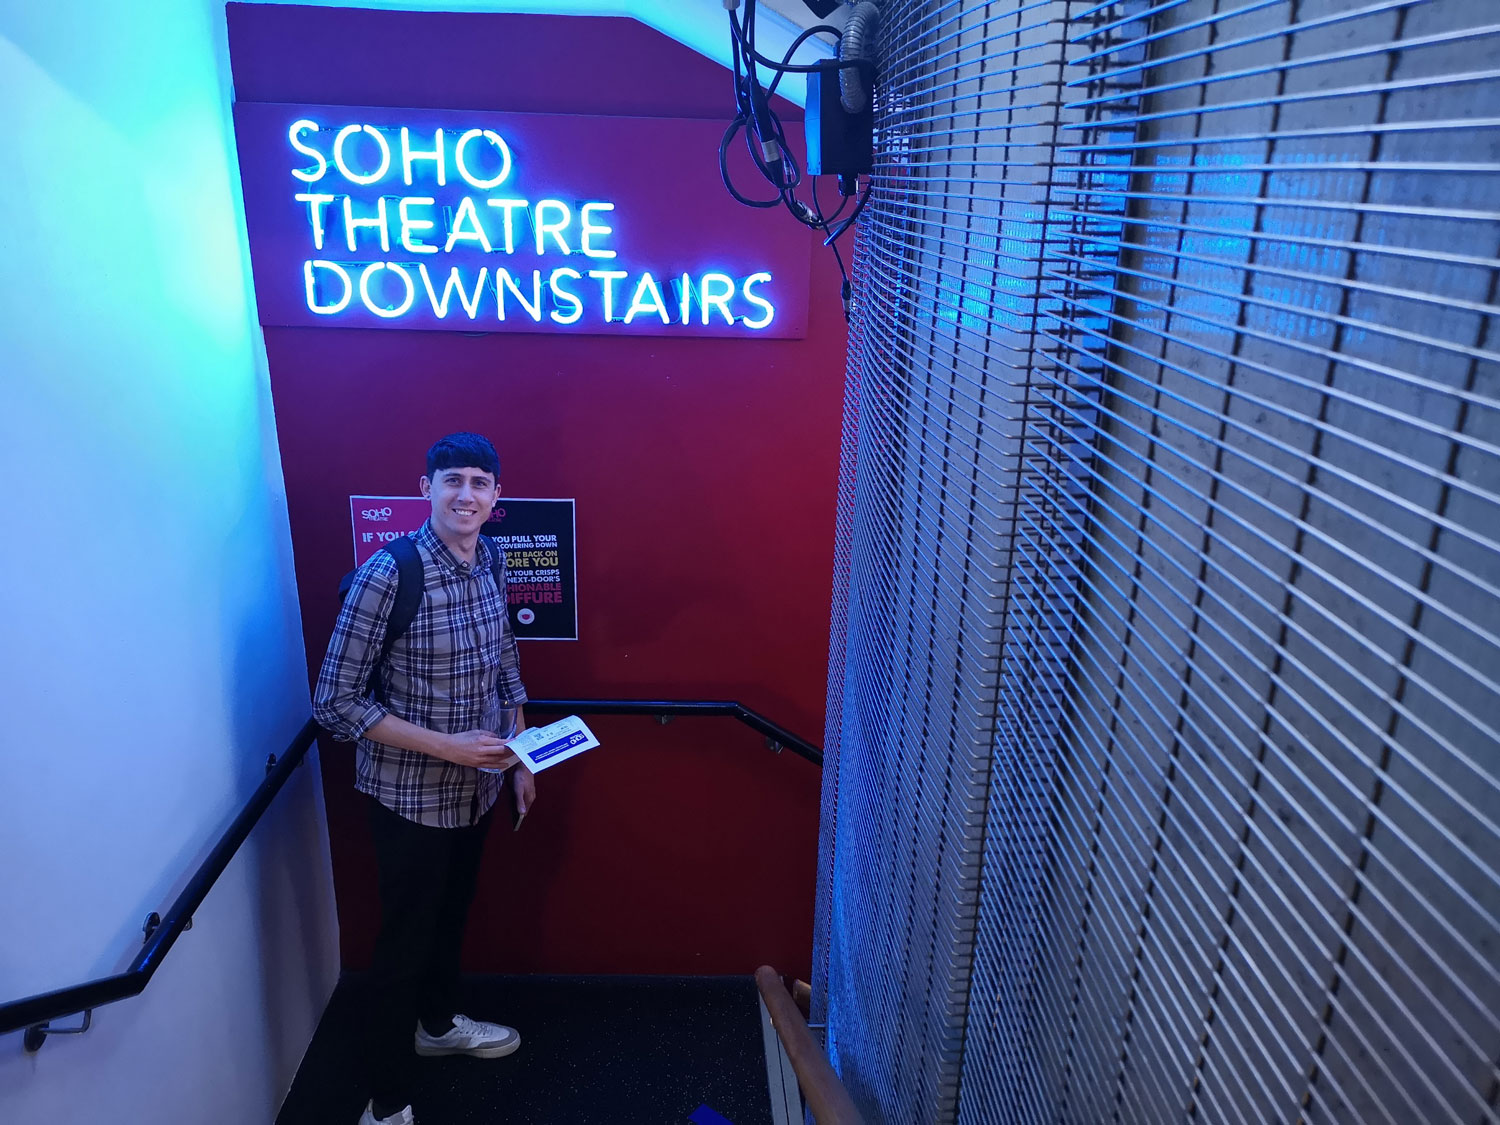 Nick descends to the downstairs theatre